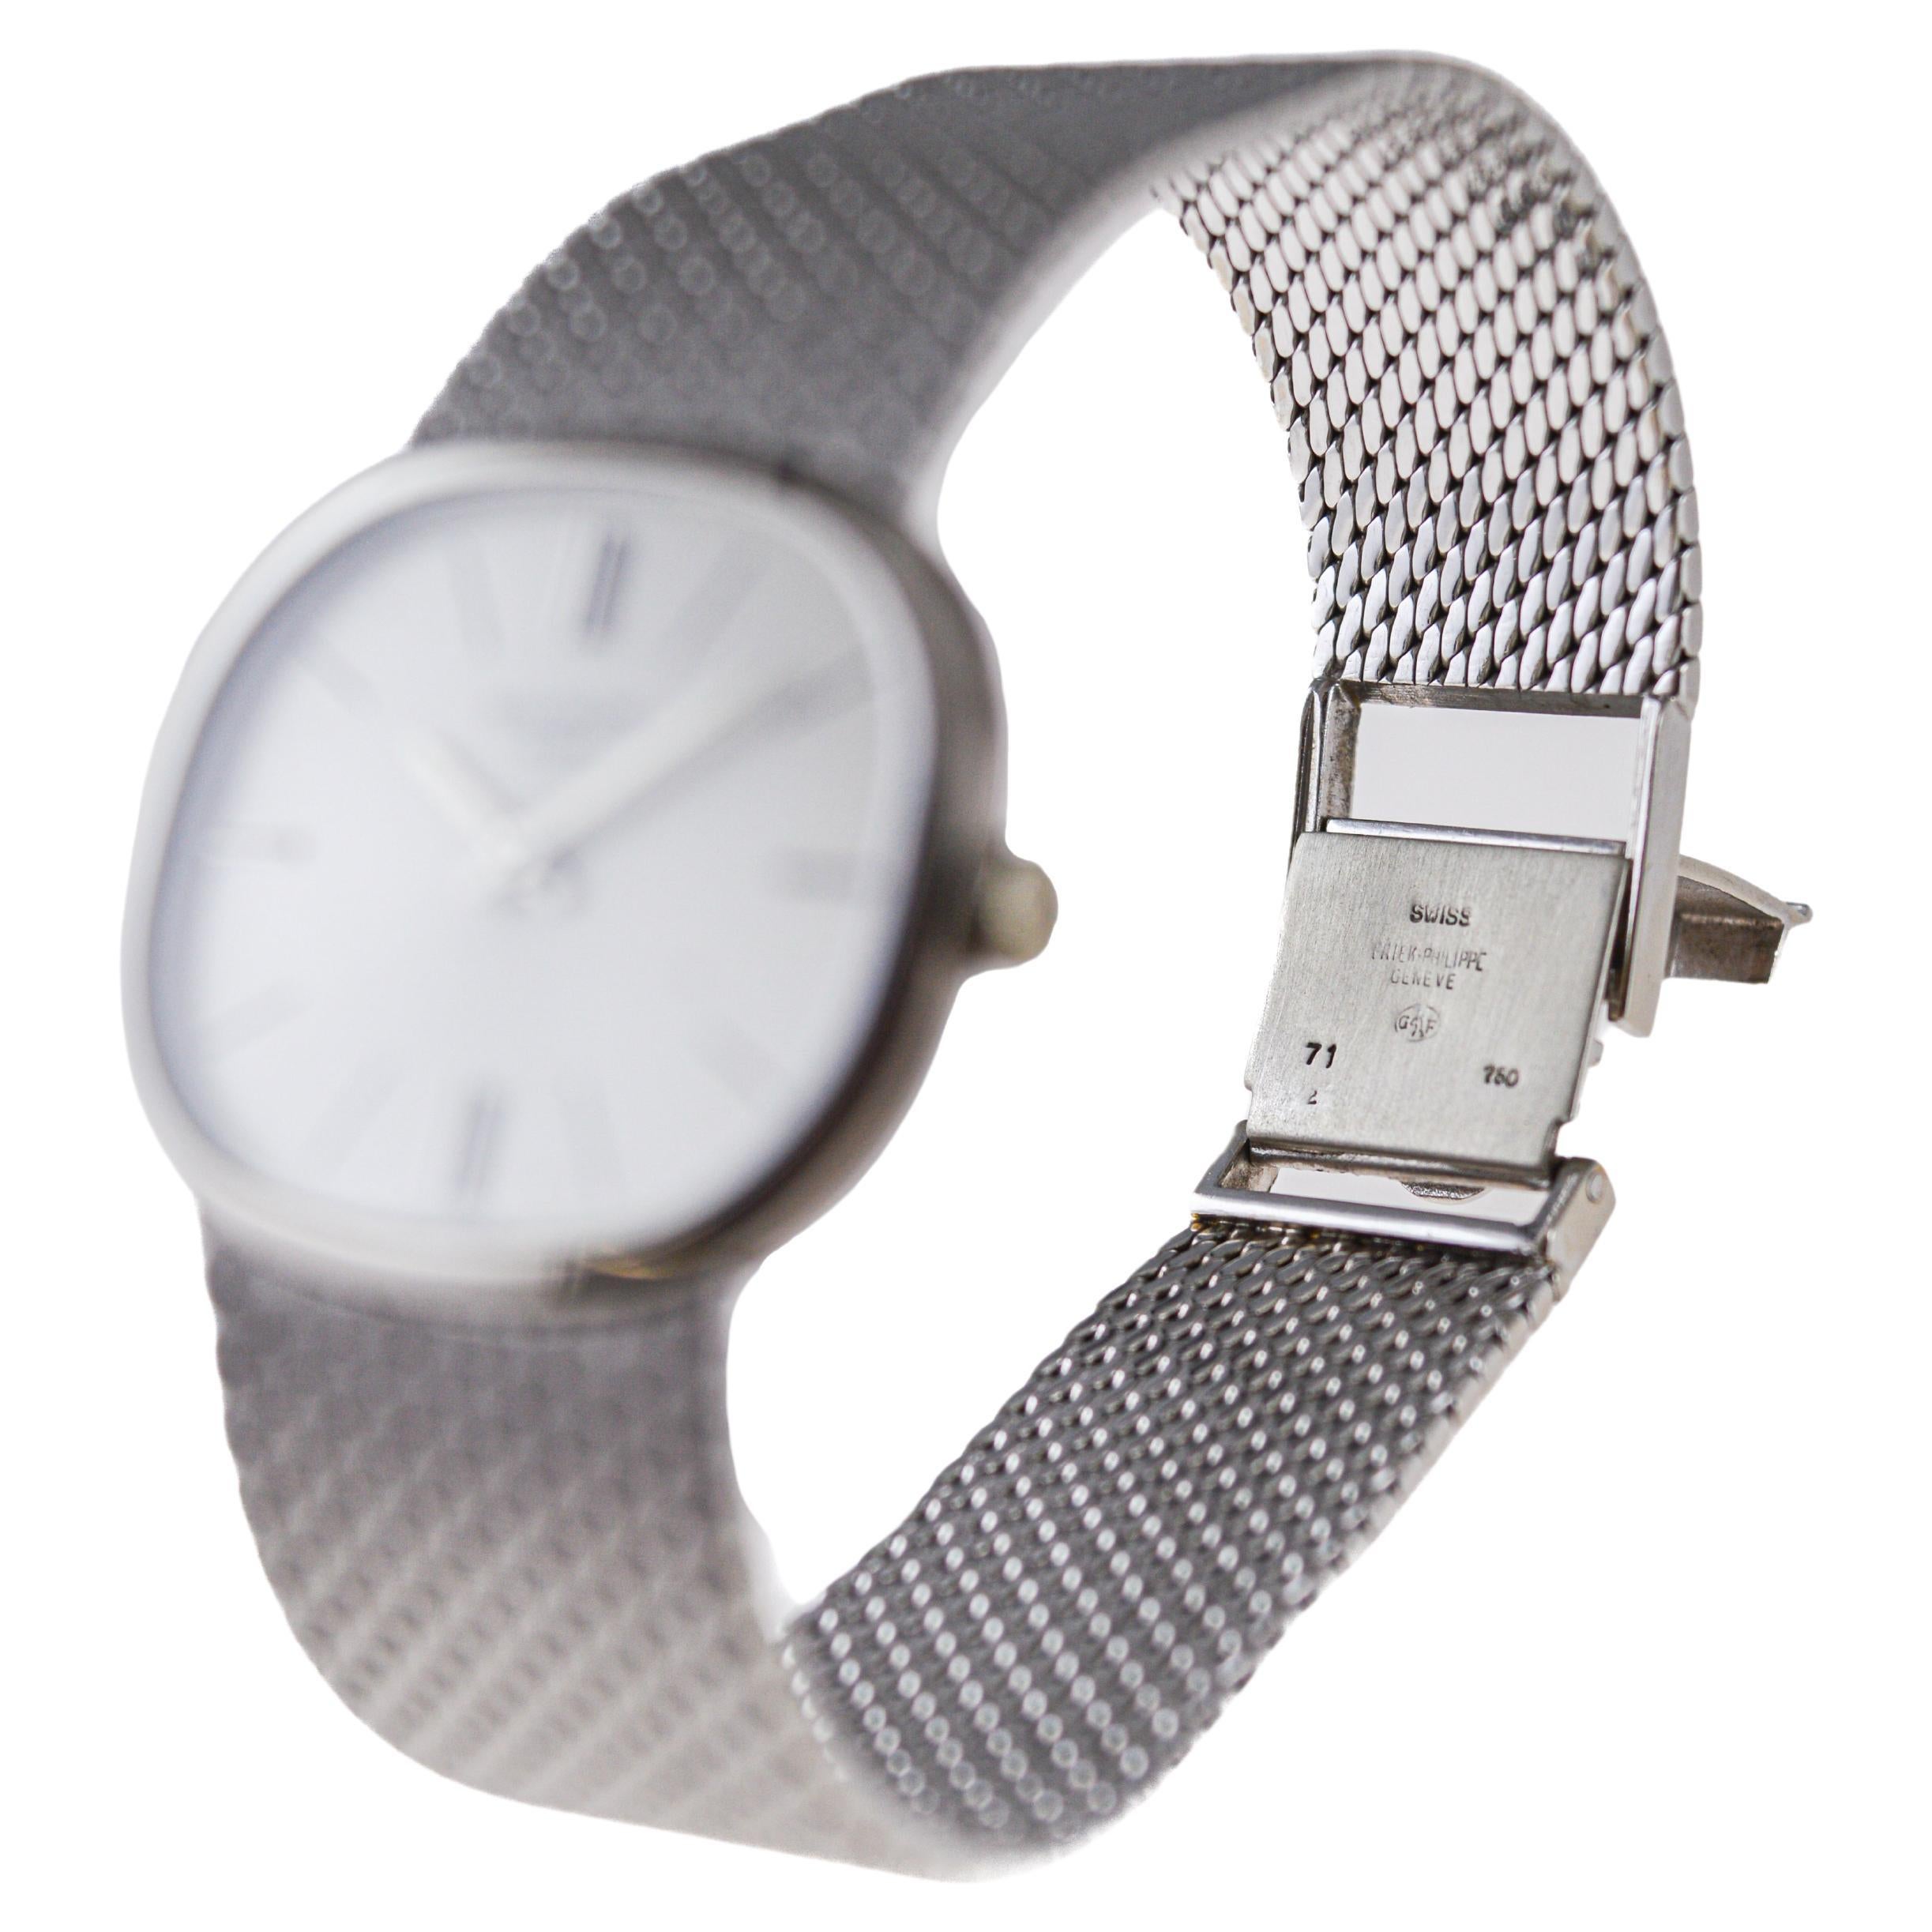 Patek Philippe 18 Karat White Gold Bracelet Watch from 1971 with Factory Archive 6